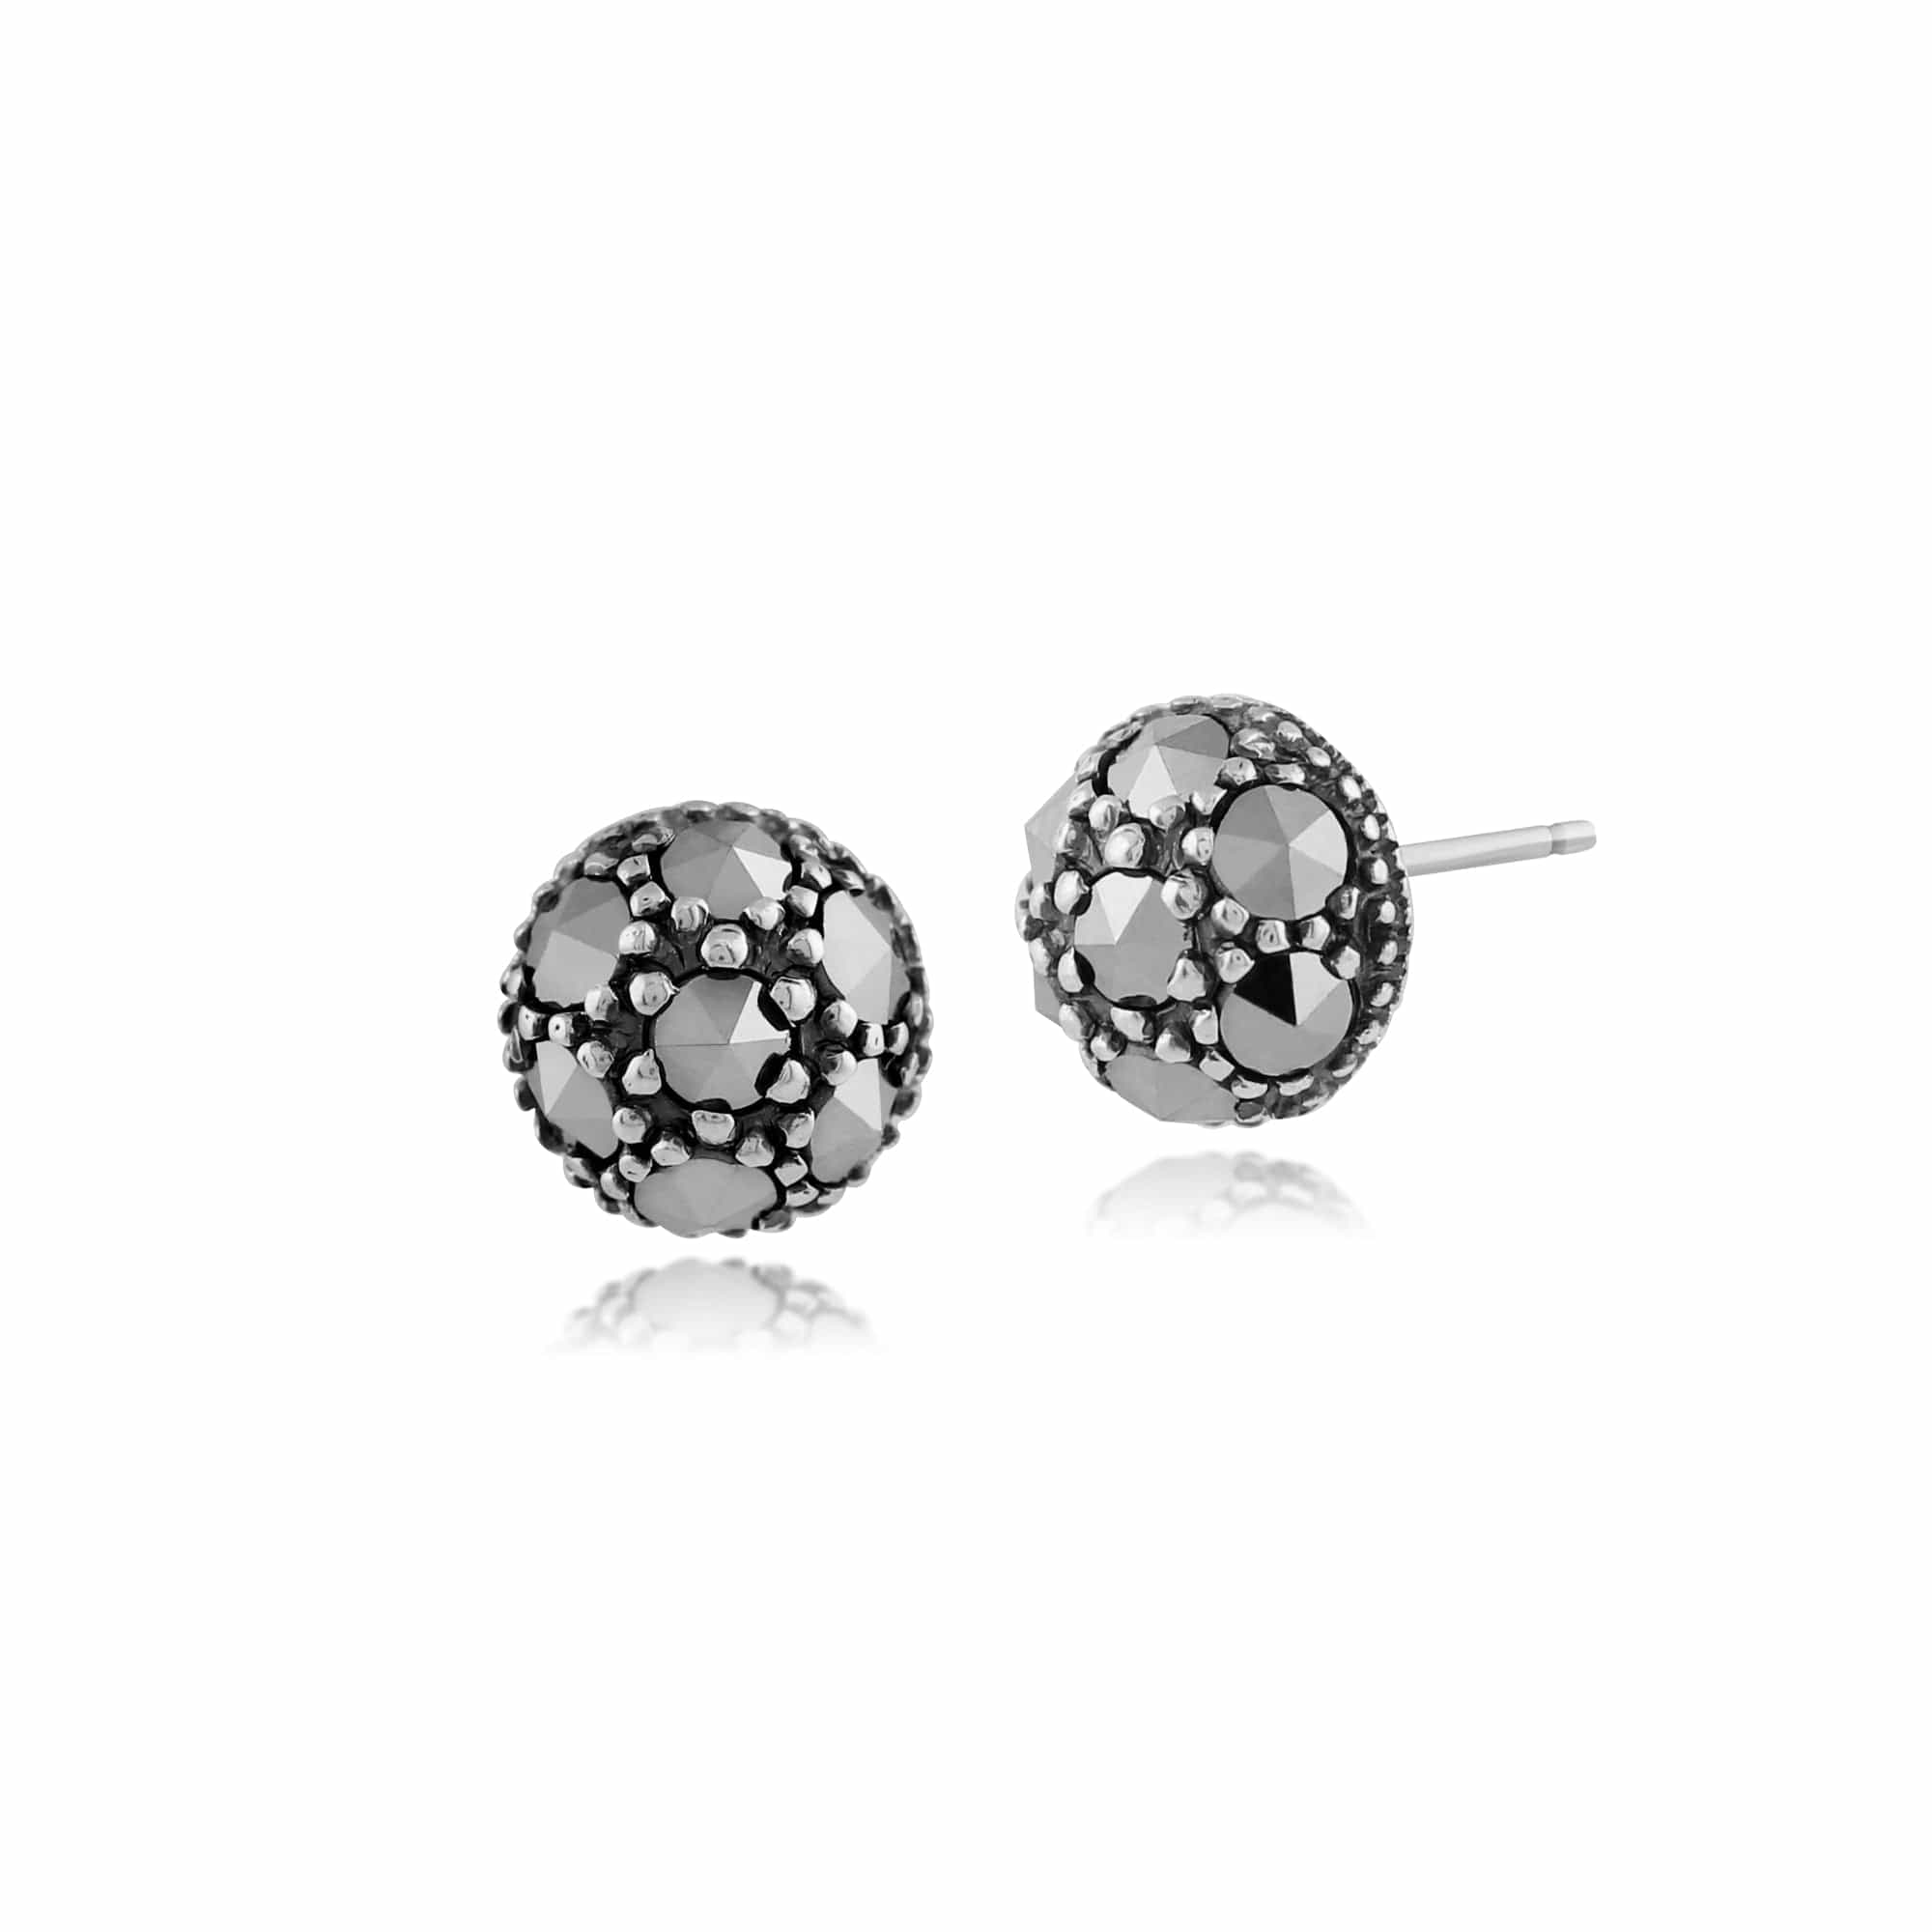 Photos - Earrings Classic Round Marcasite Stud  in 925 Sterling Silver